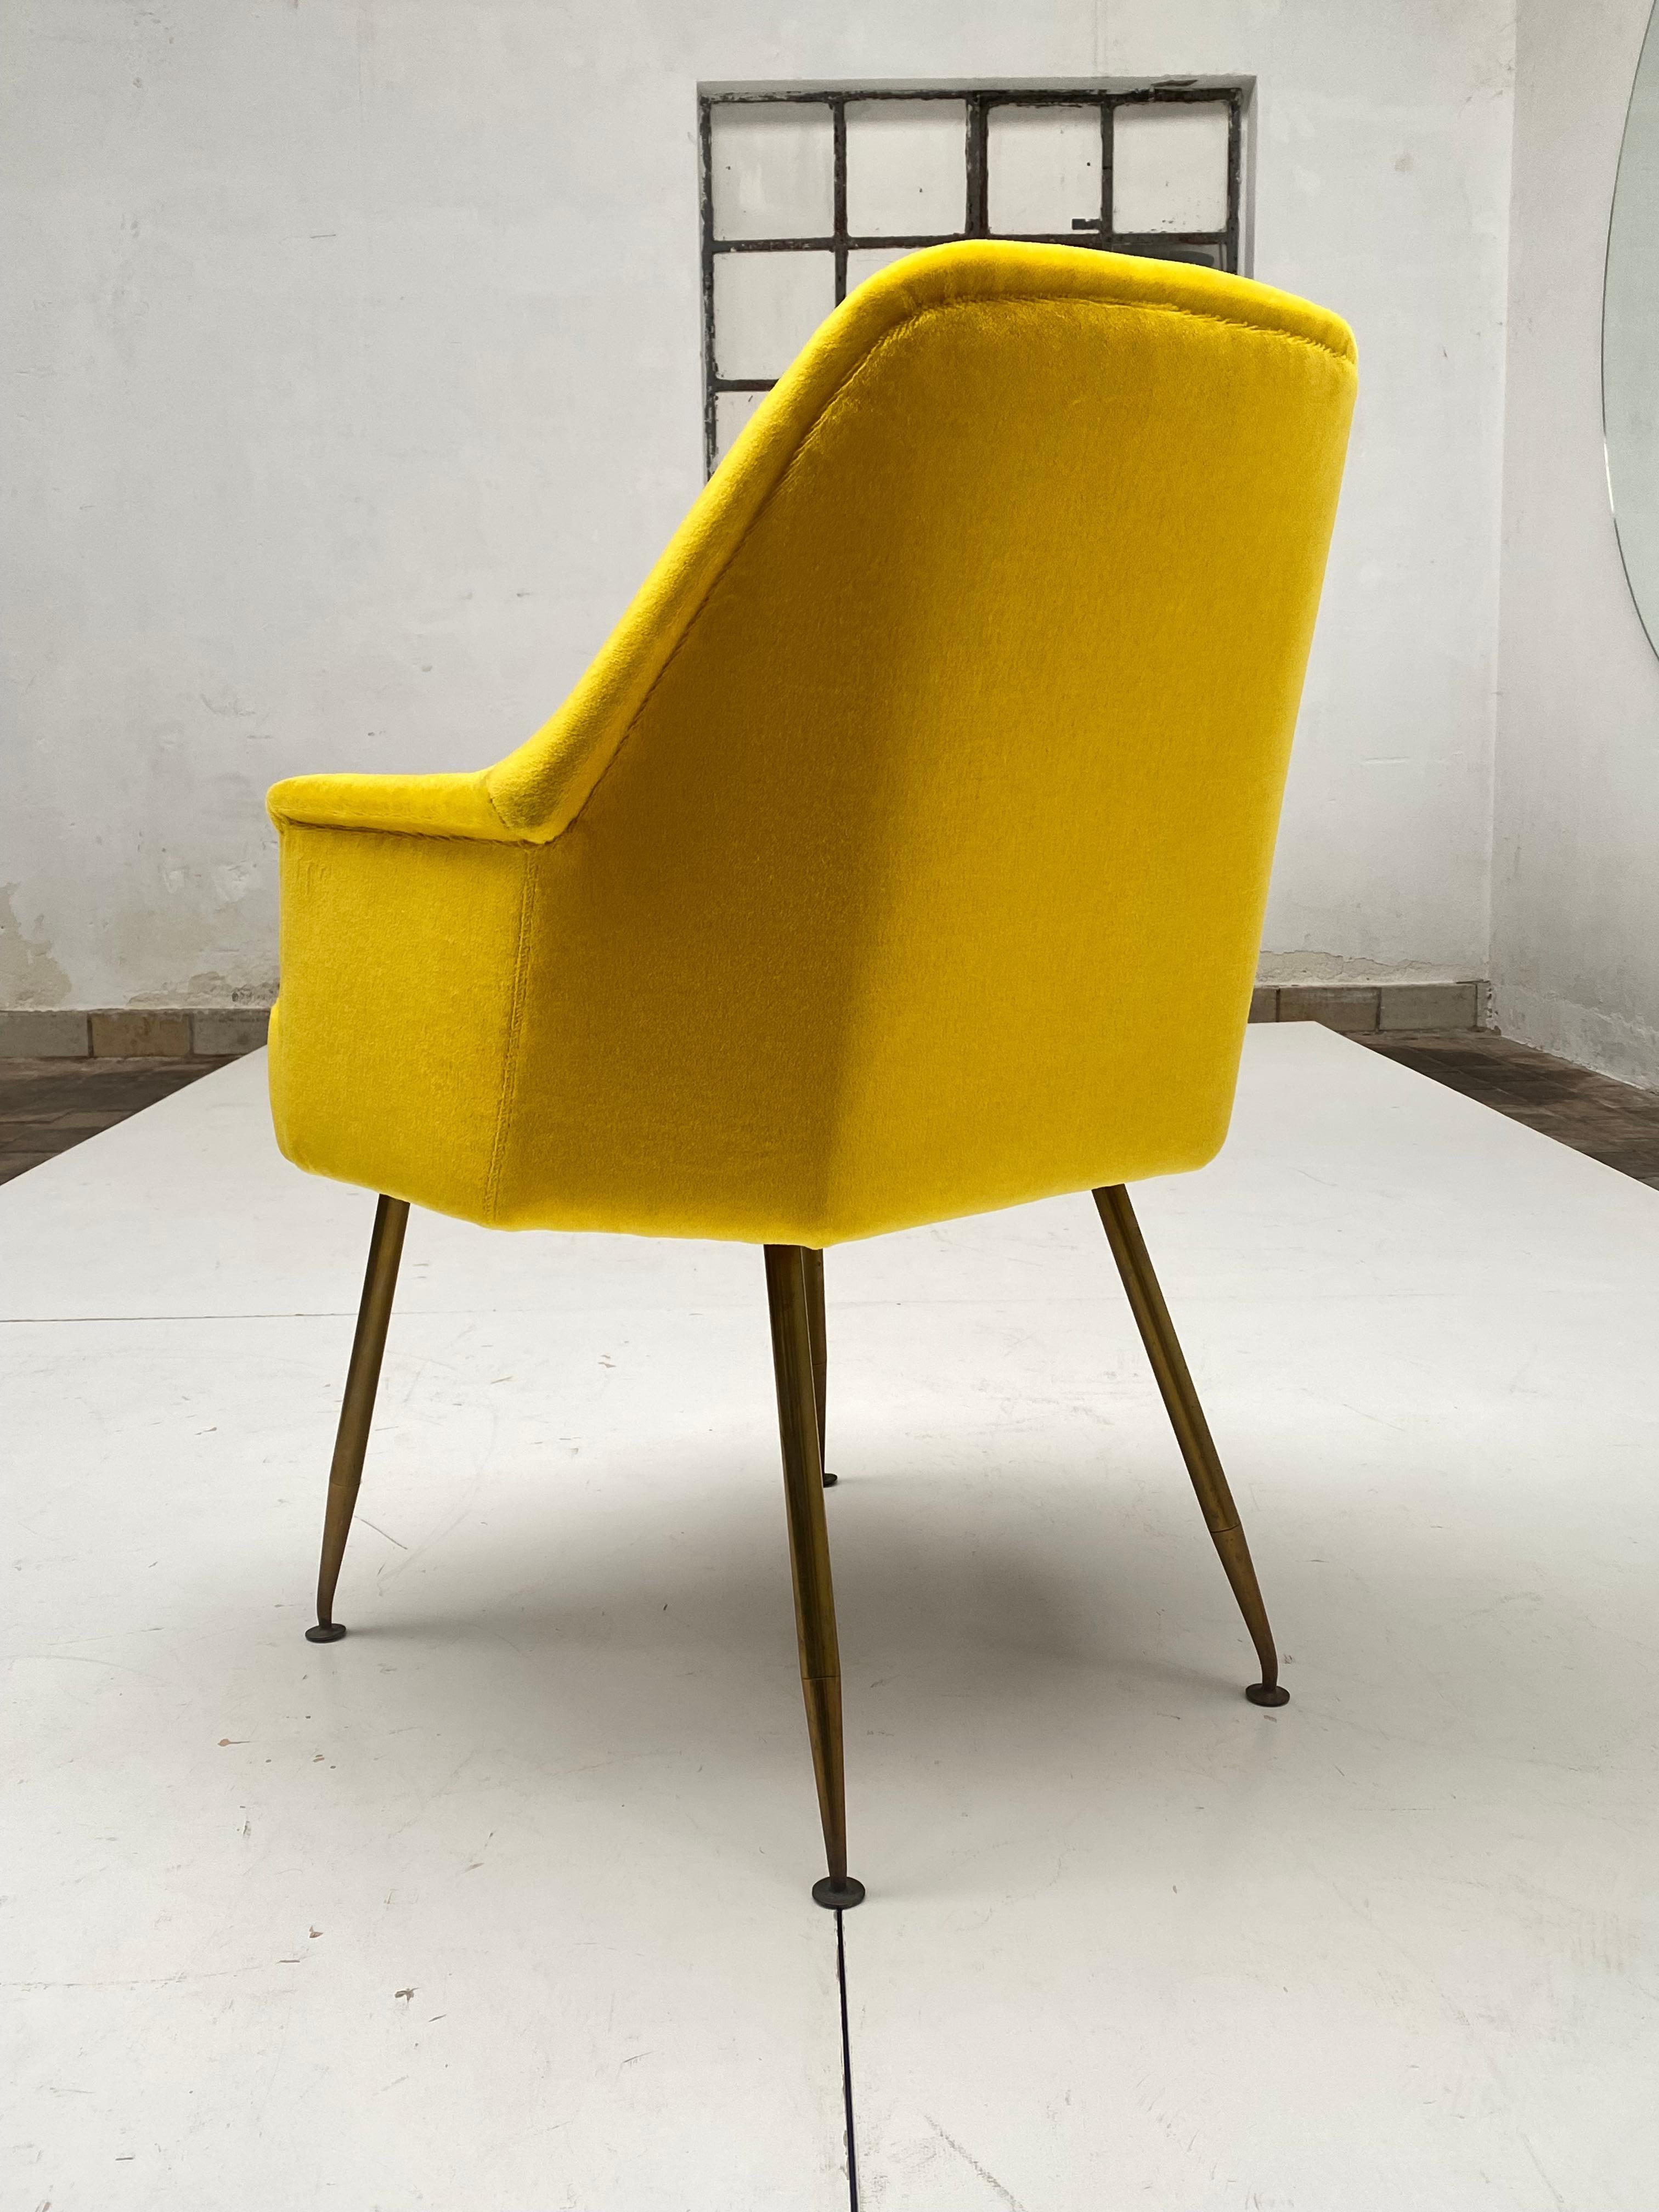 Amazing restored 'Campanula' Carver Chair with beautiful tapered form brass legs by Italian architect Carlo Pagani (architectural partner of both Gio Ponti and Lina Bo Bardi) for Arflex, Italy, 1952. 

The Carver chair is a rare variant of the